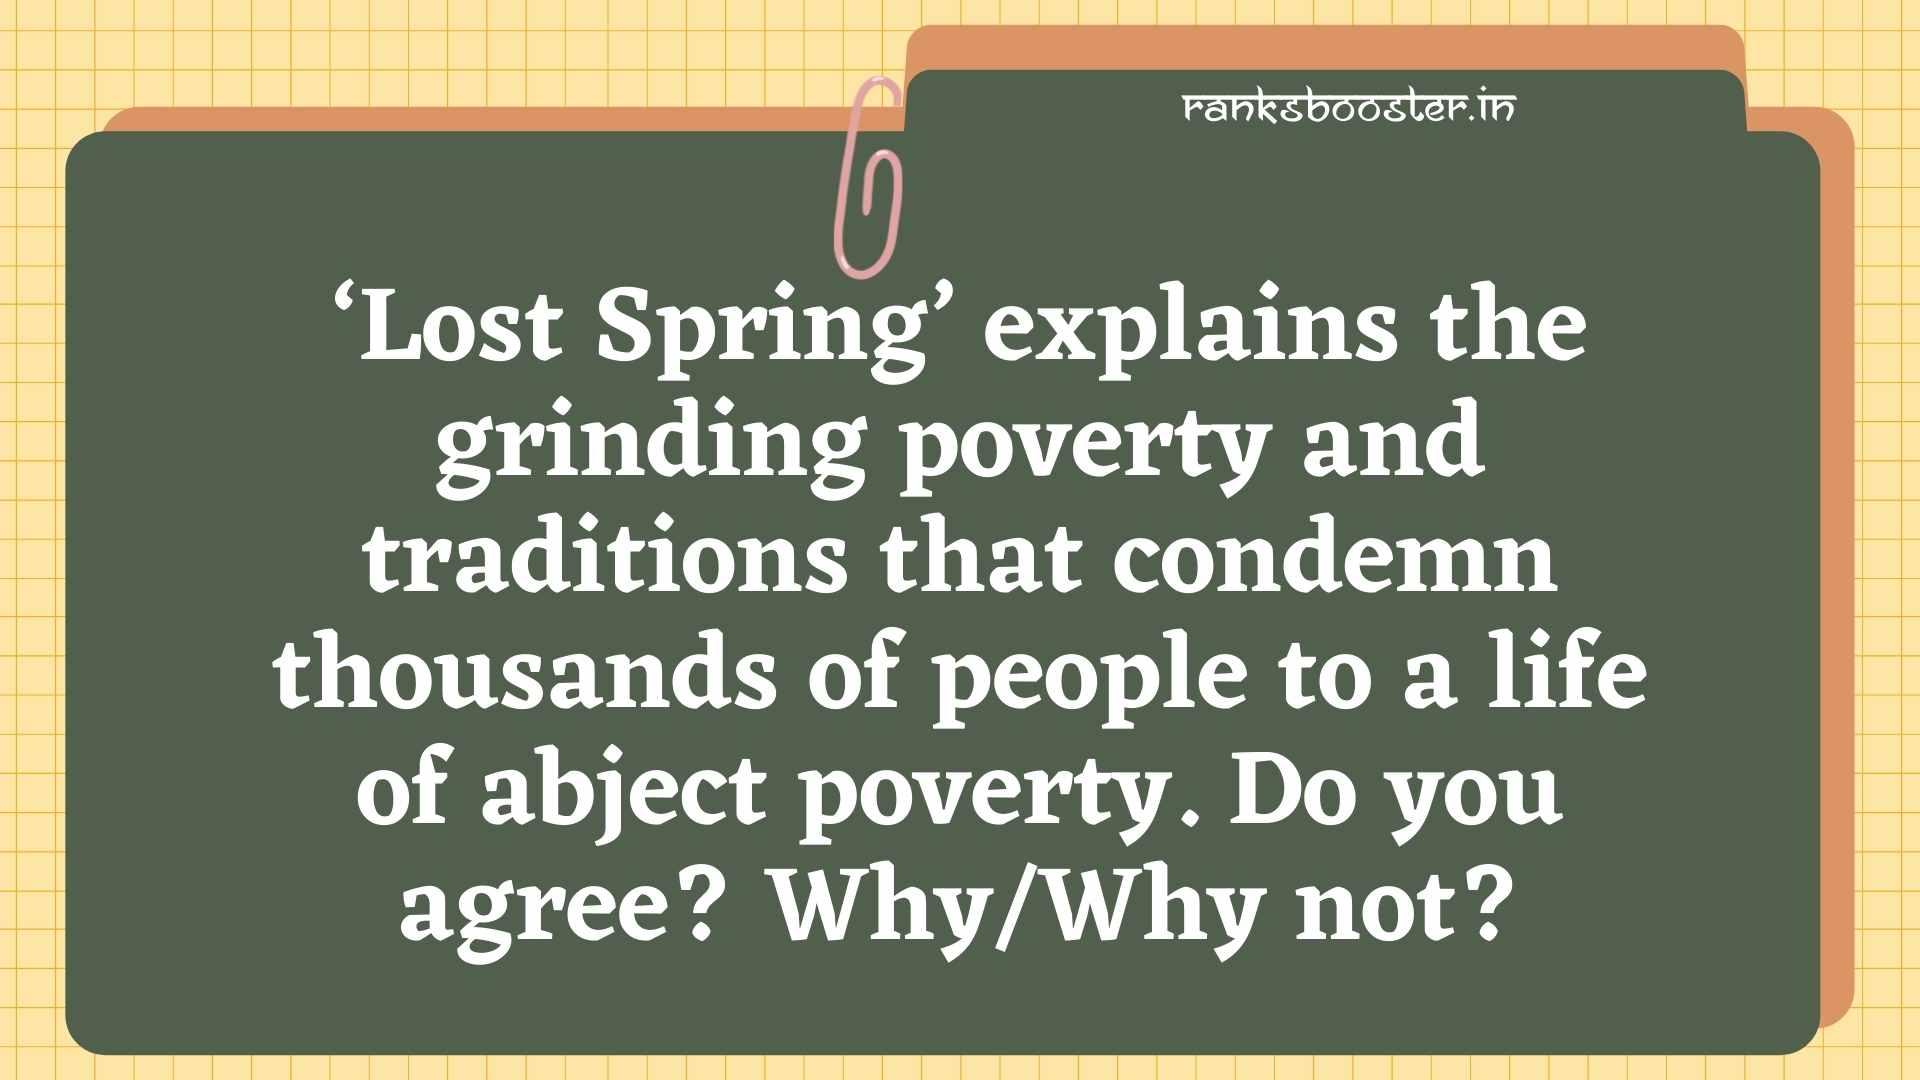 ‘Lost Spring’ explains the grinding poverty and traditions that condemn thousands of people to a life of abject poverty. Do you agree? Why/Why not? [CBSE (AI) 2011]